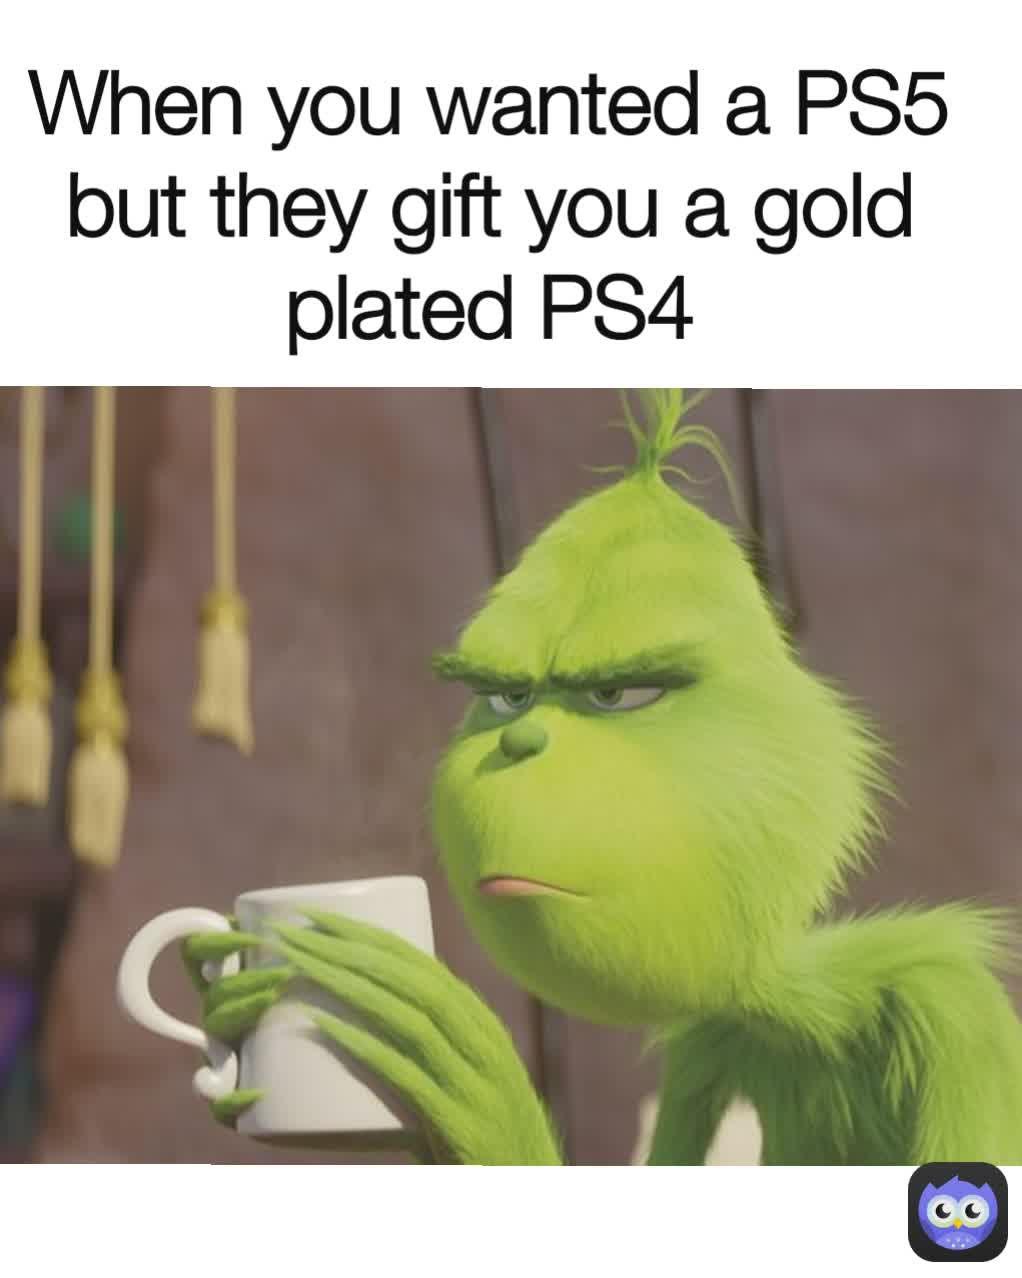 When you wanted a PS5 but they gift you a gold plated PS4